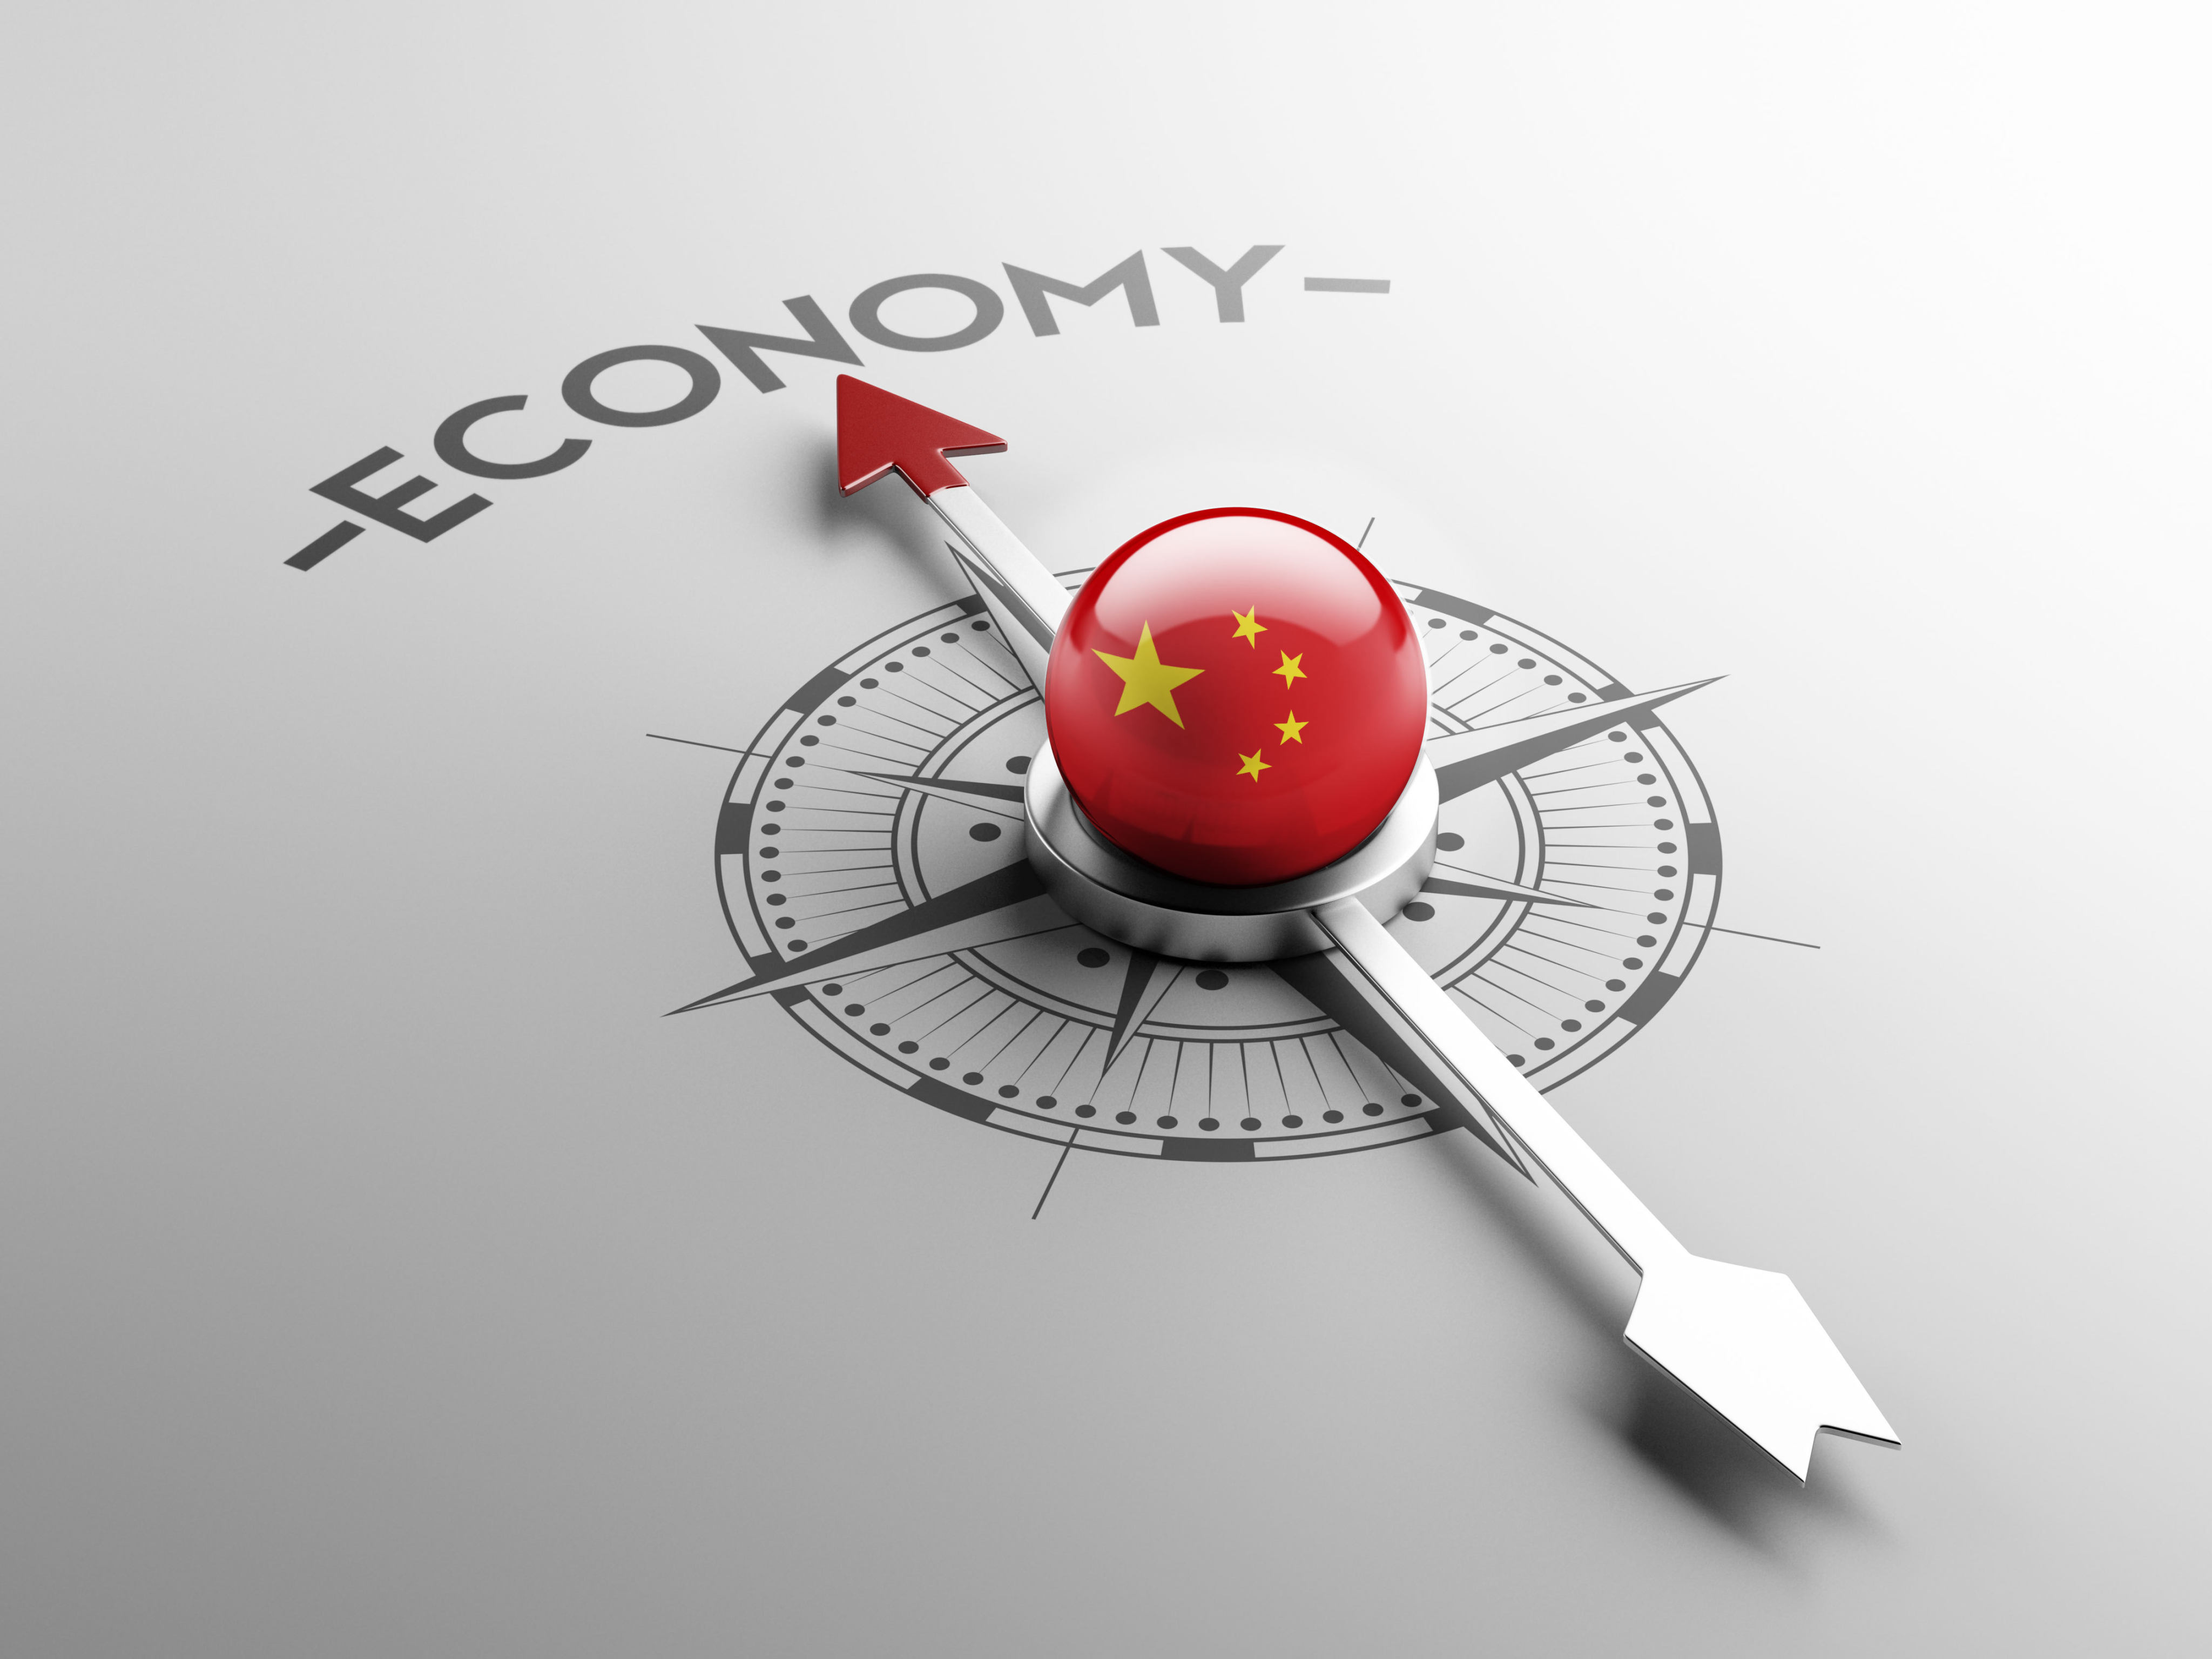 Chinese authorities pledged to build the nation’s private economy “bigger, better and stronger”, akin to the massive support given to state-owned enterprises. Image: Shutterstock